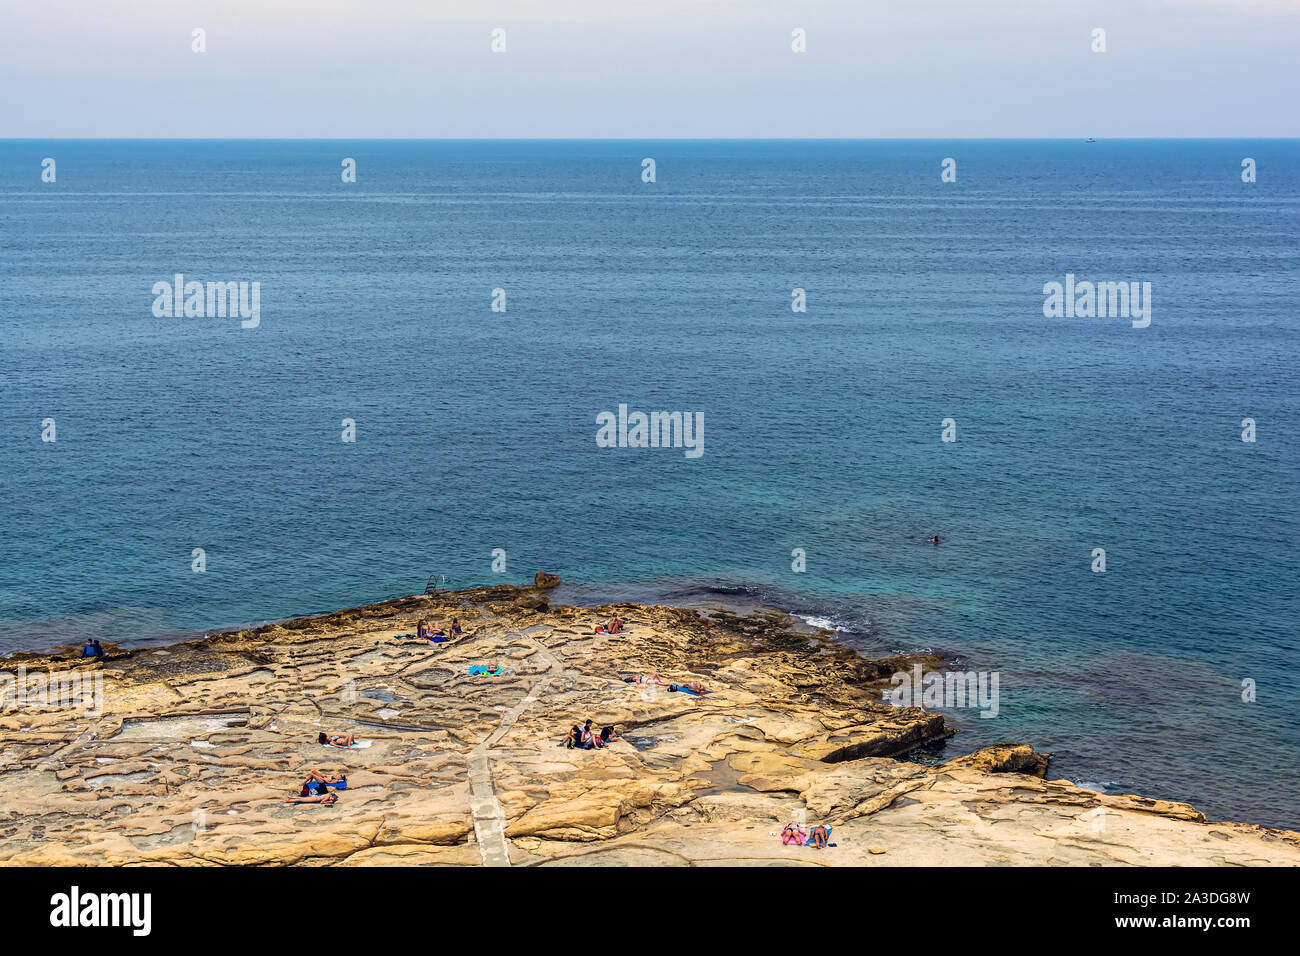 People relaxing on the Silema beach in Malta getting tanned and swimming in Mediterranean Sea. Stock Photo